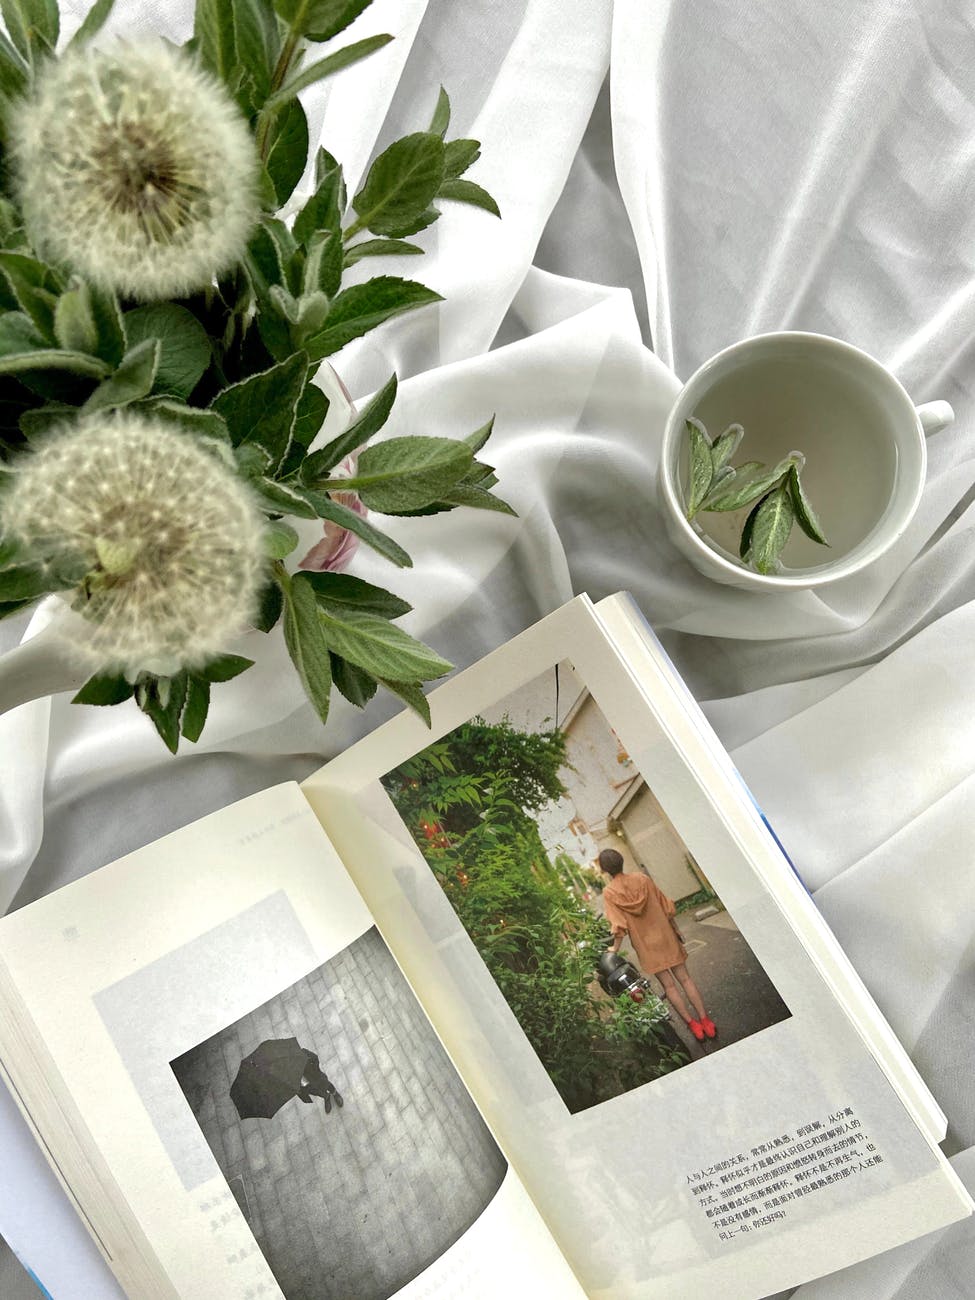 opened book on white cloth near dandelion flowers